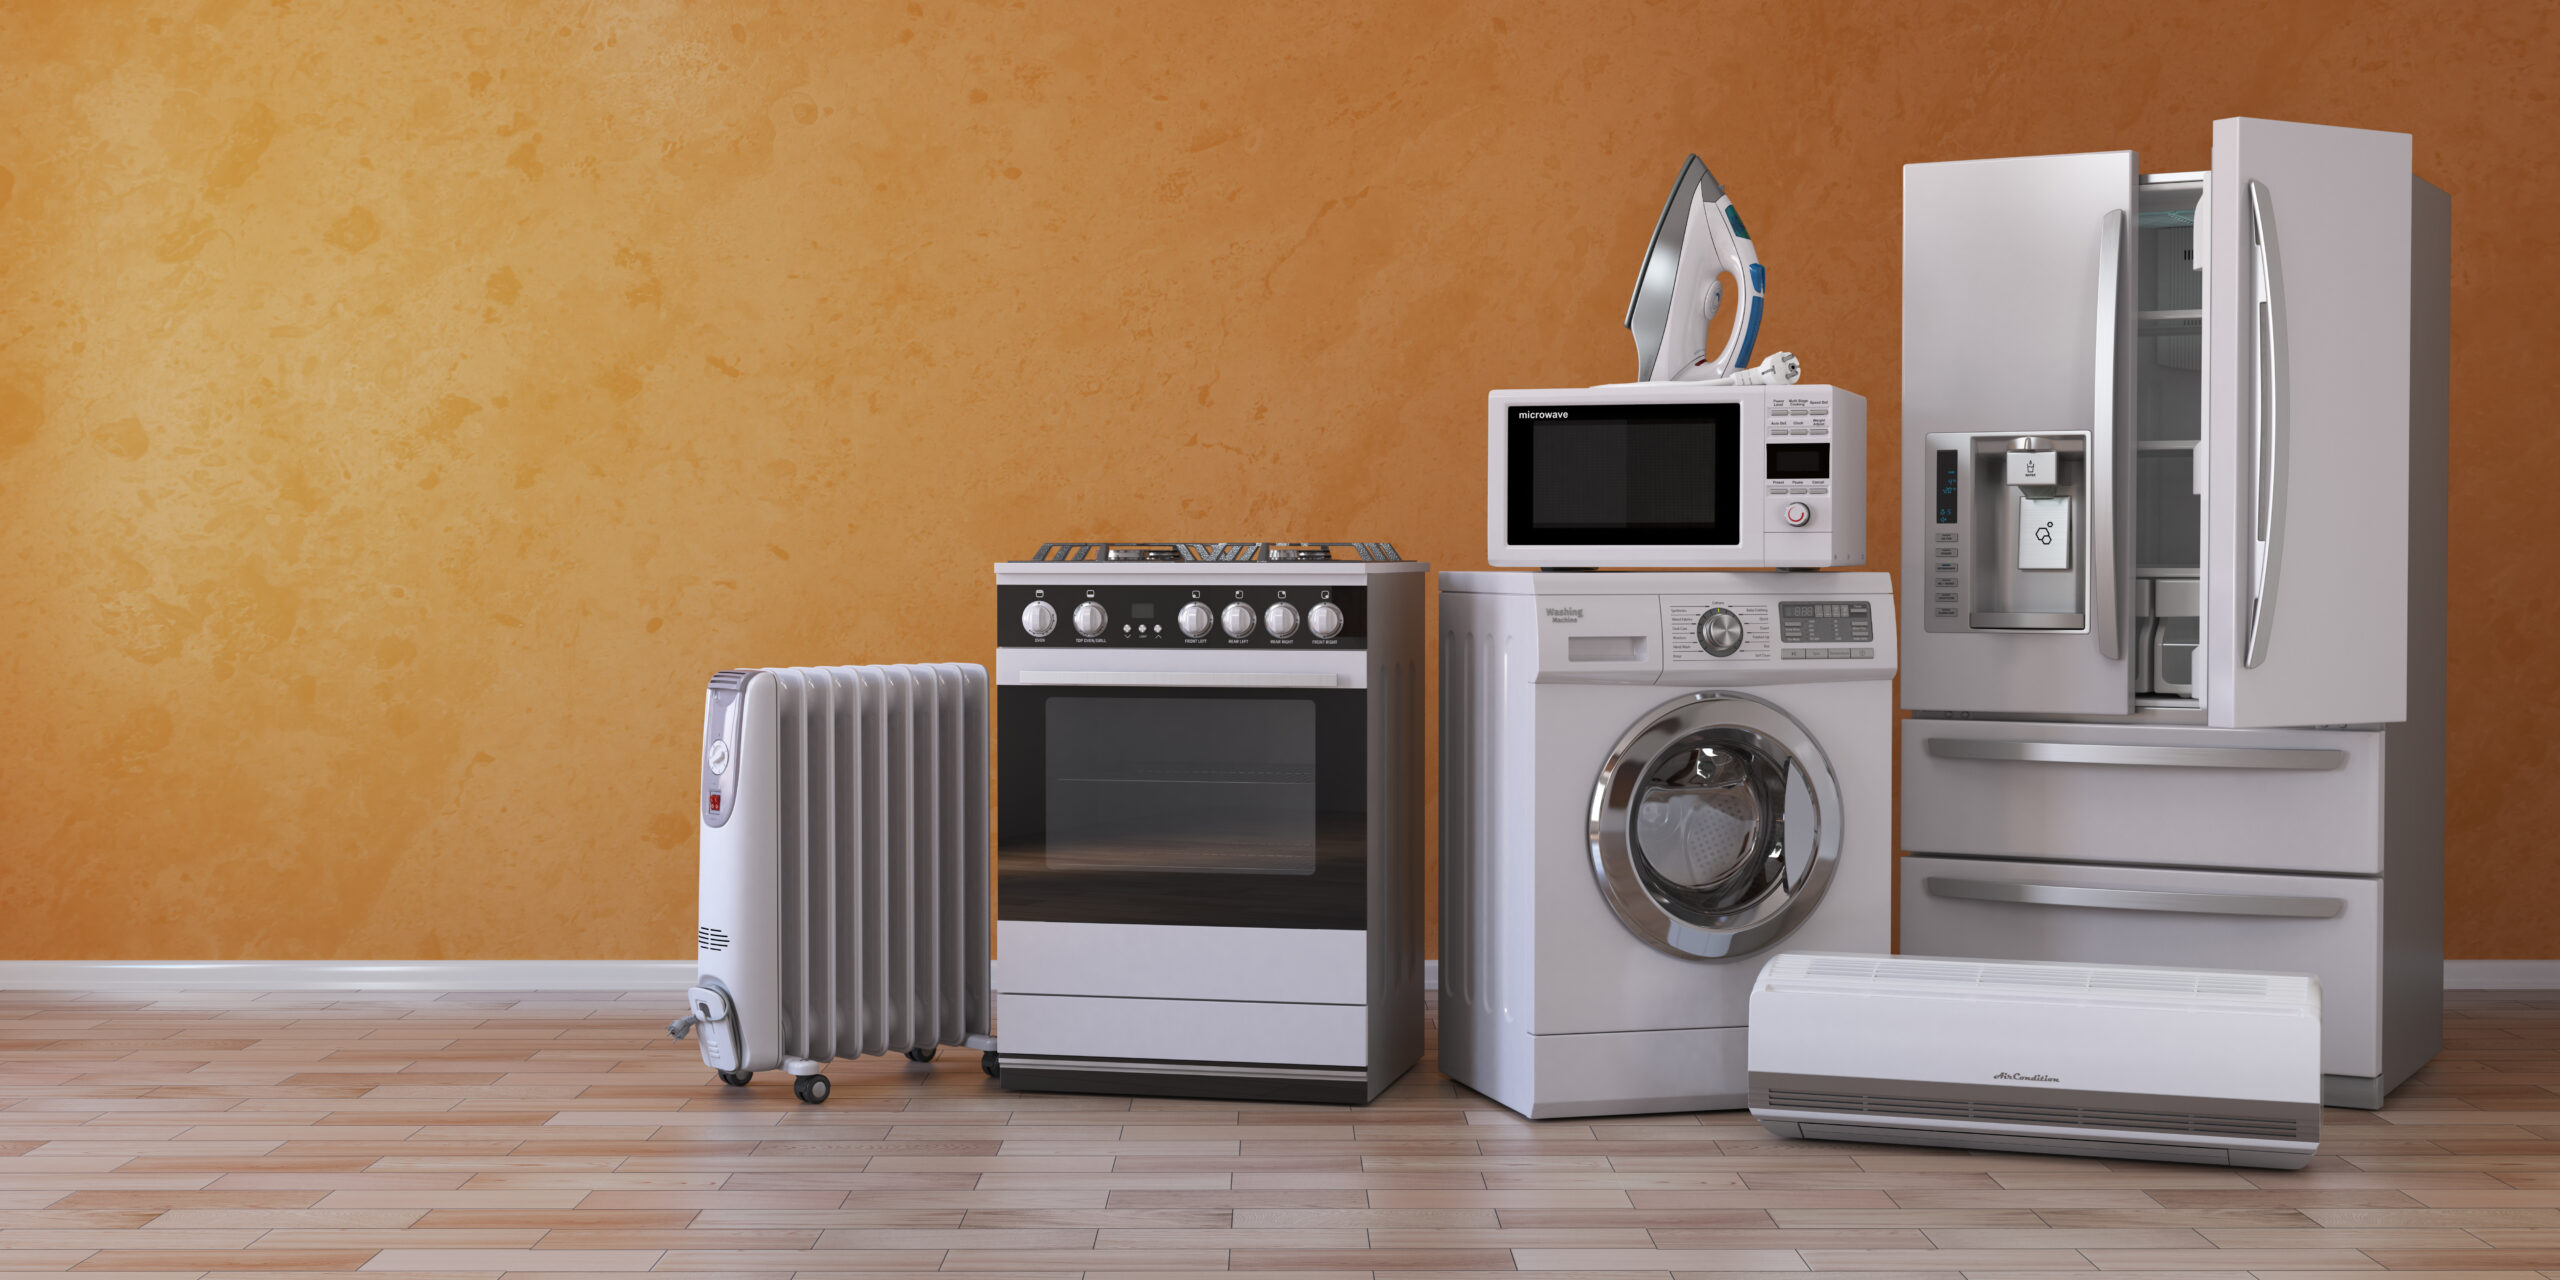 Storing Household Appliances - Unit Suggestions and Tips